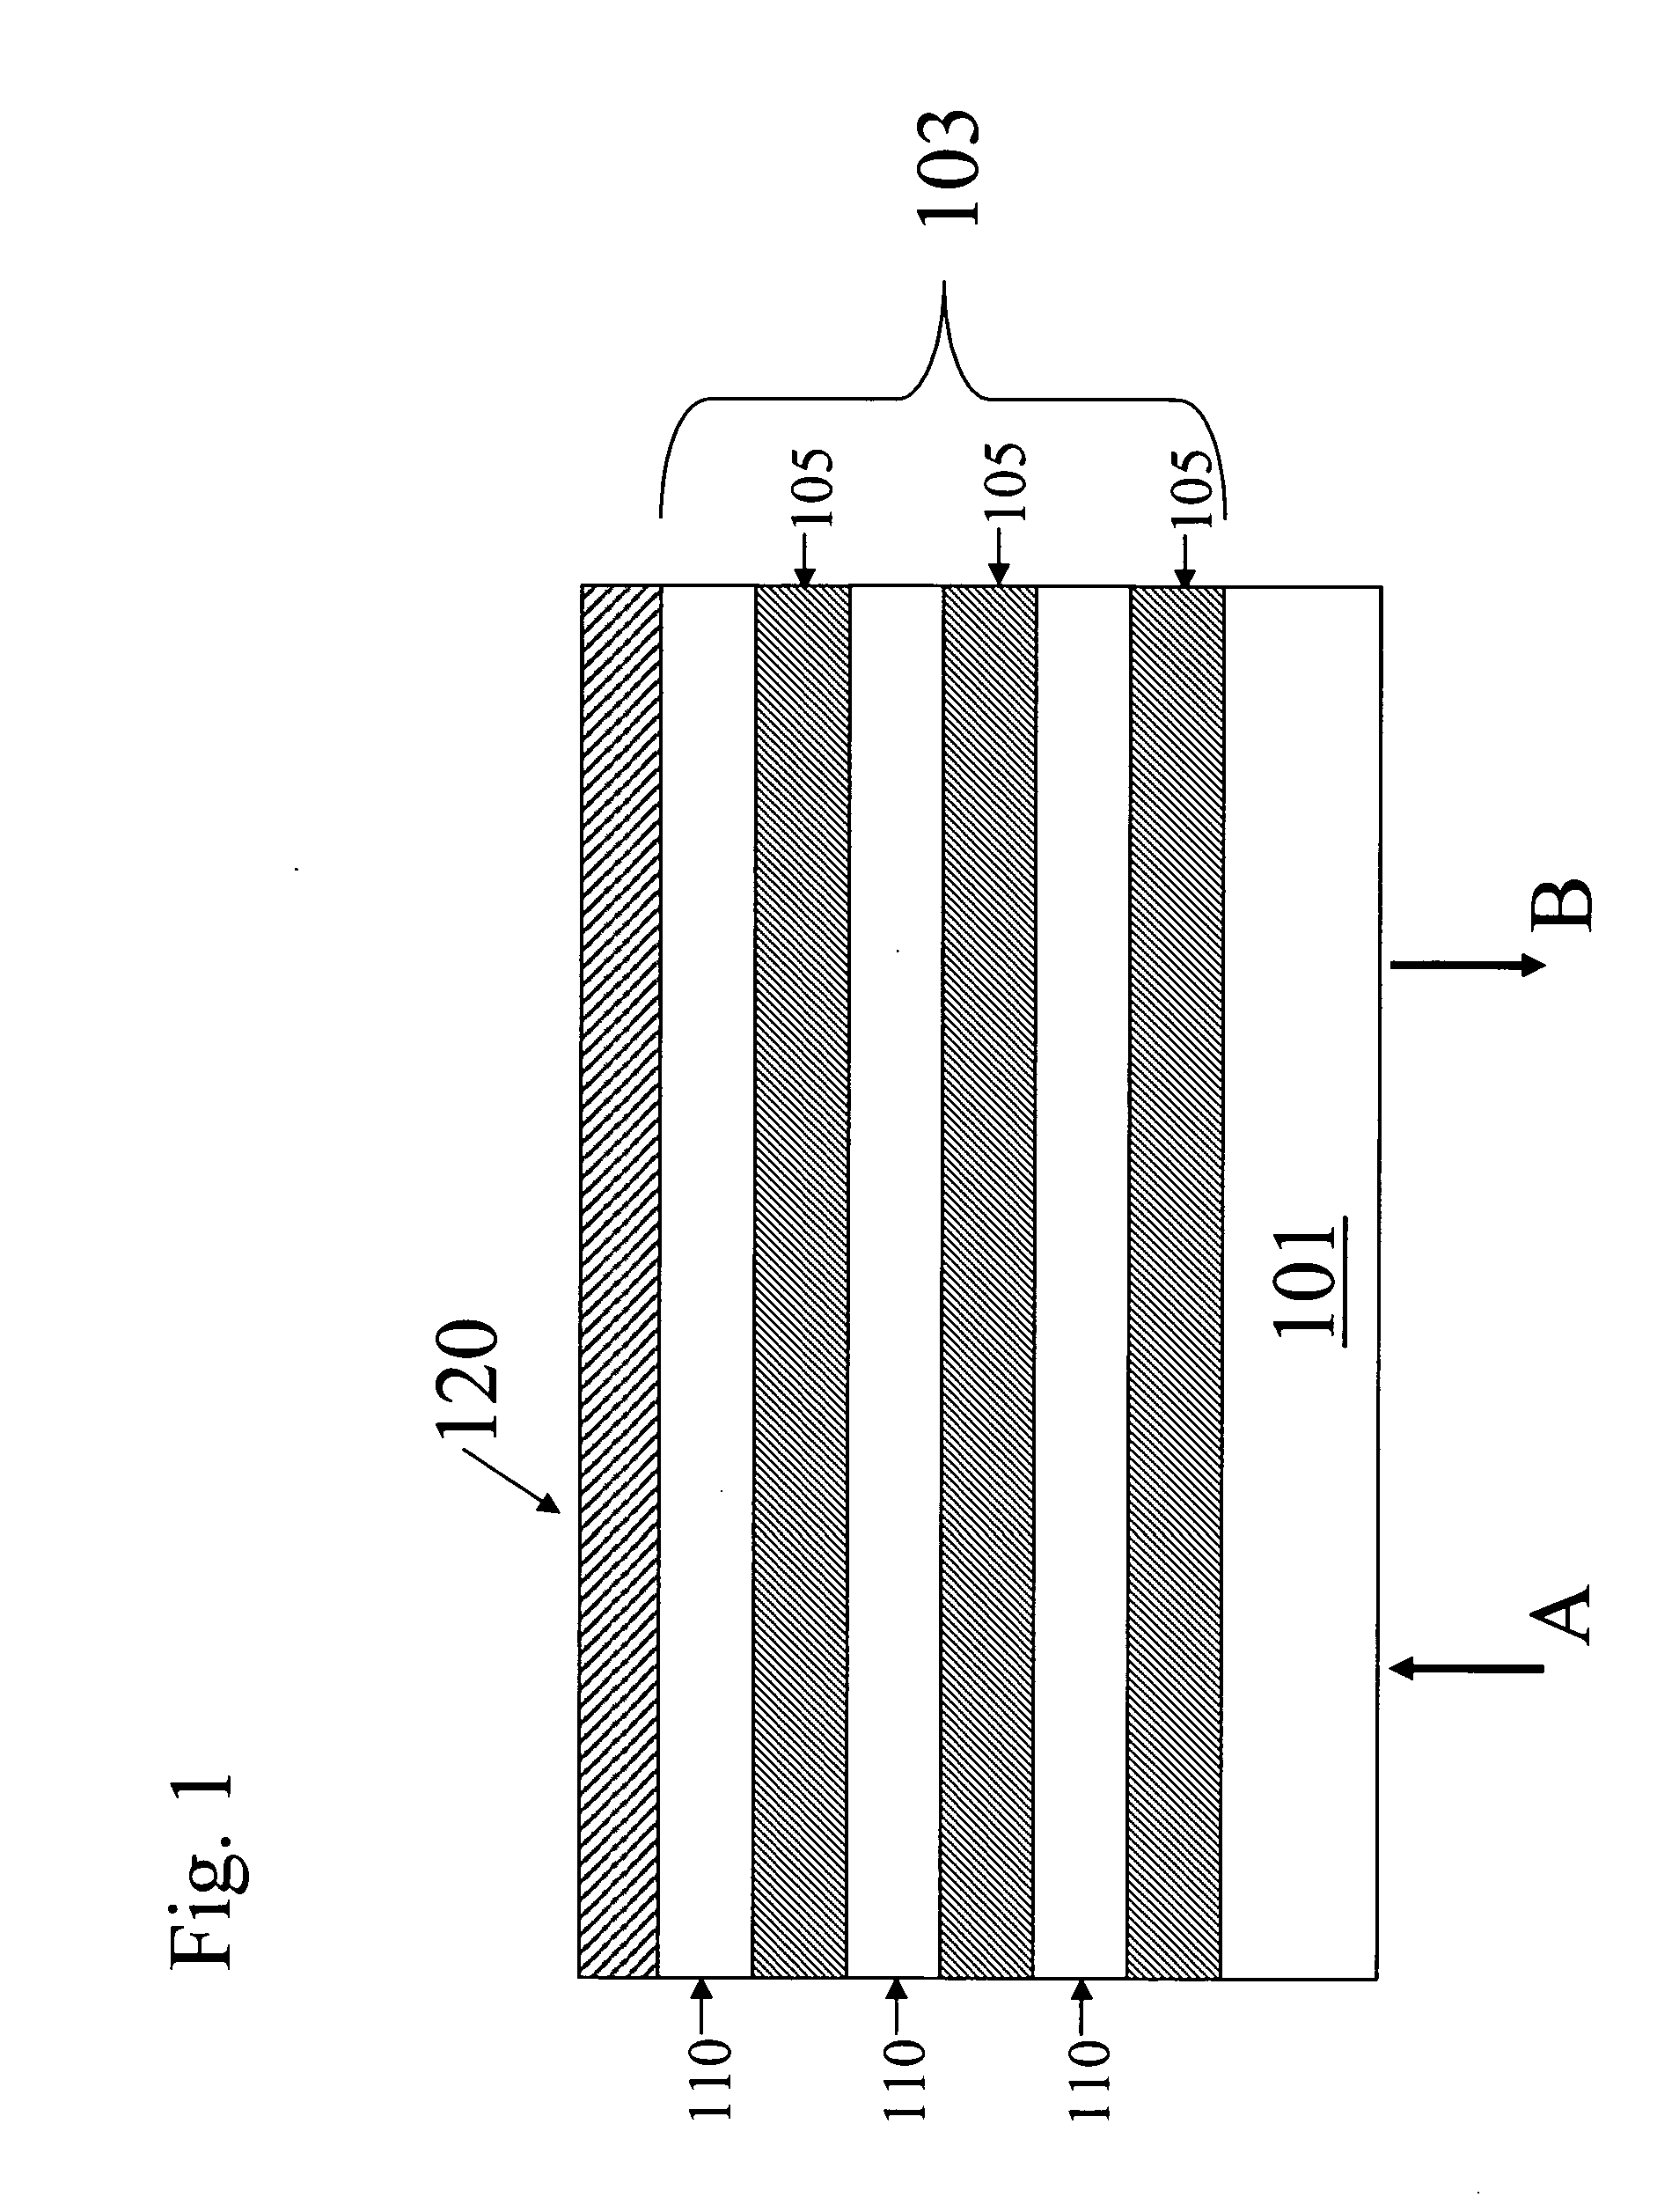 Aperiodic dielectric multilayer stack